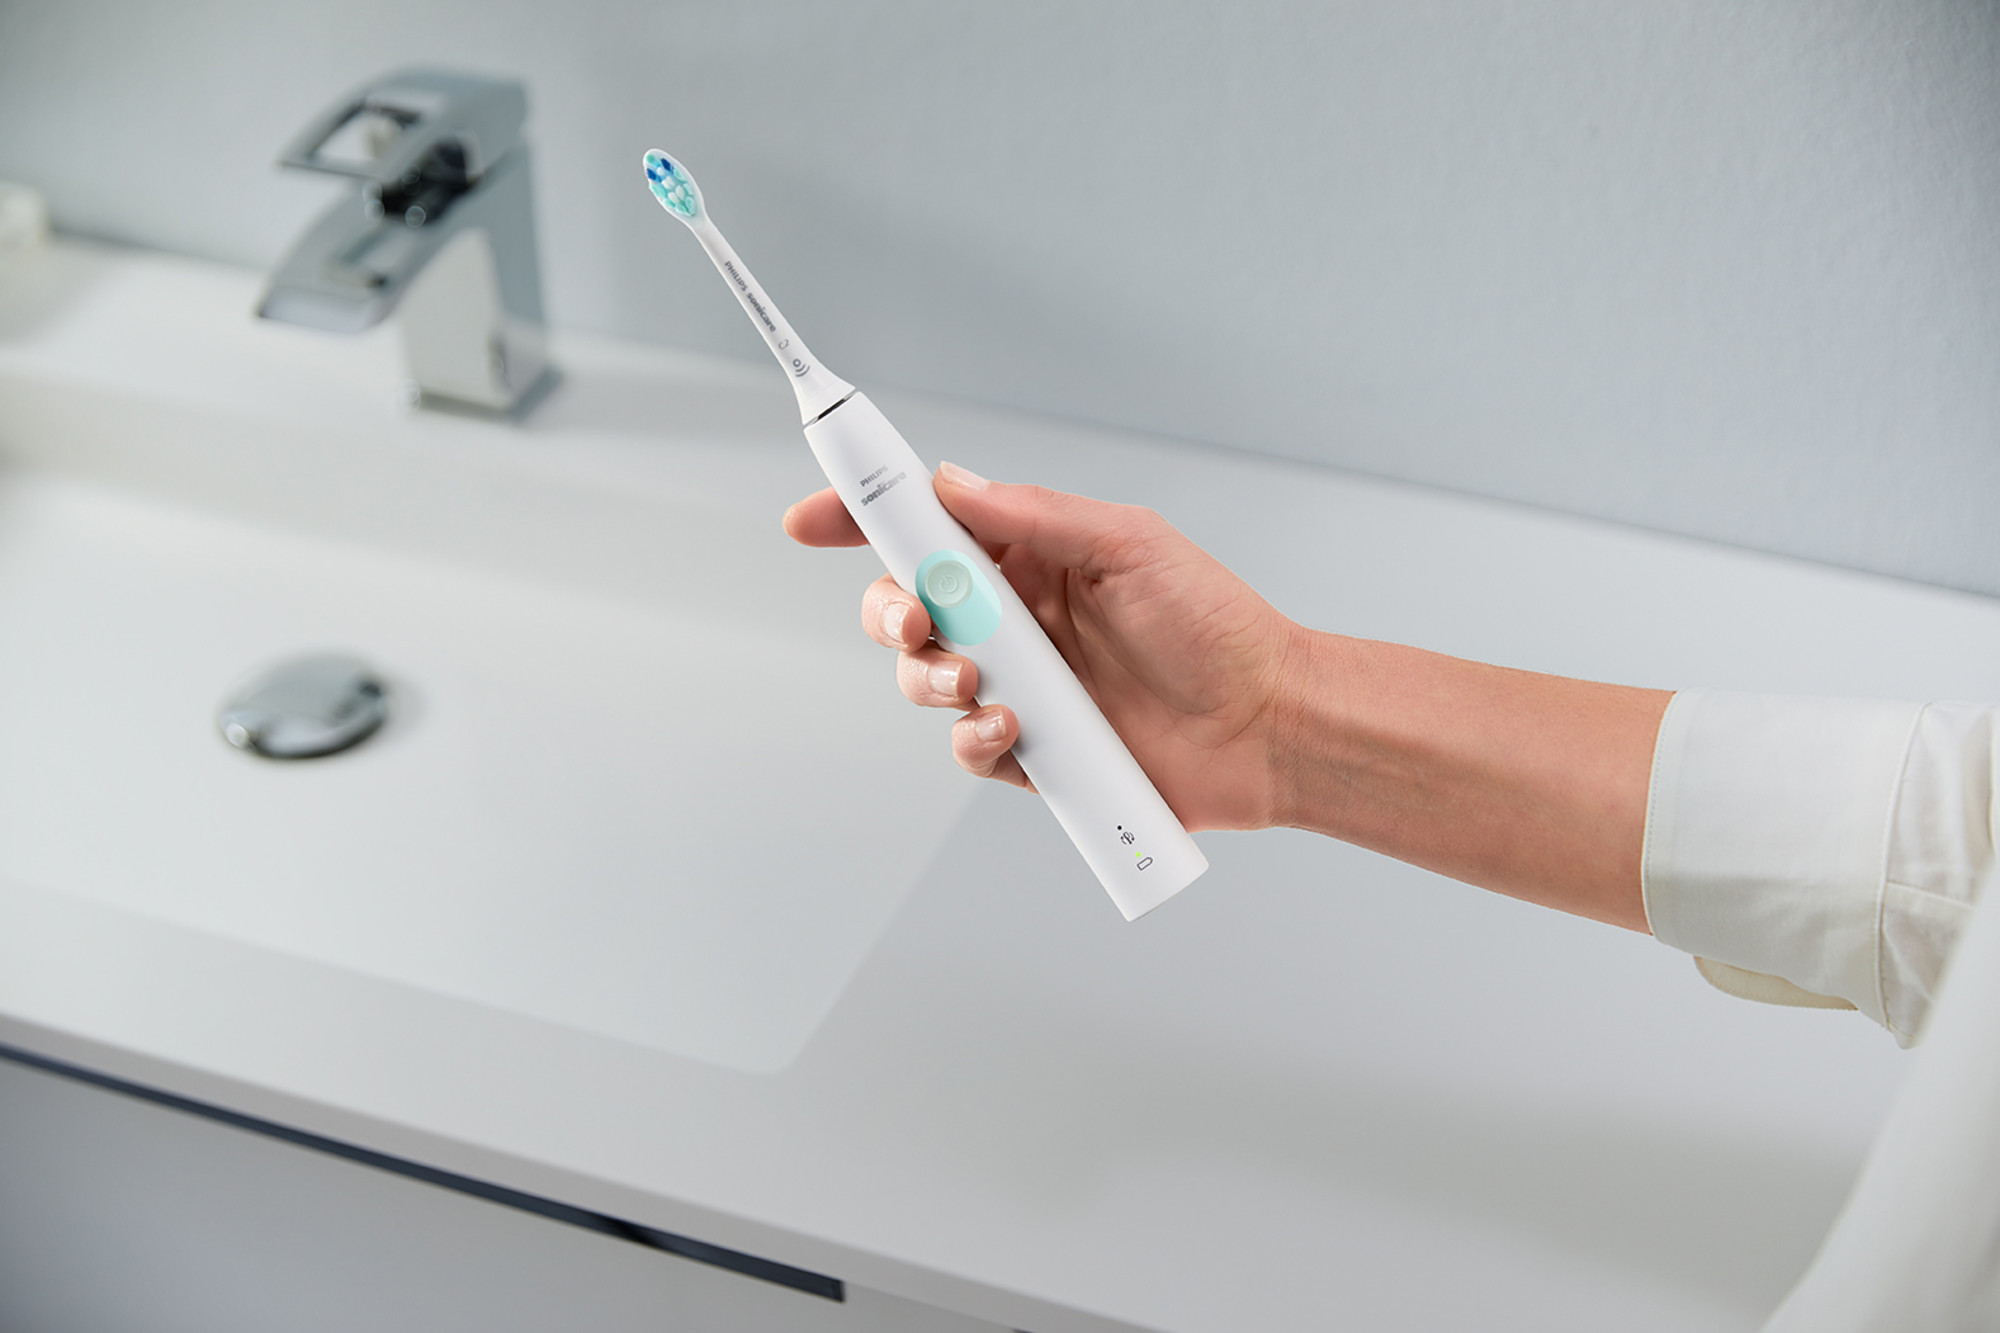 Philips Sonicare ProtectiveClean 4100 Plaque Control, Rechargeable Electric Toothbrush with Pressure Sensor, White Mint HX6817/01 - image 8 of 14